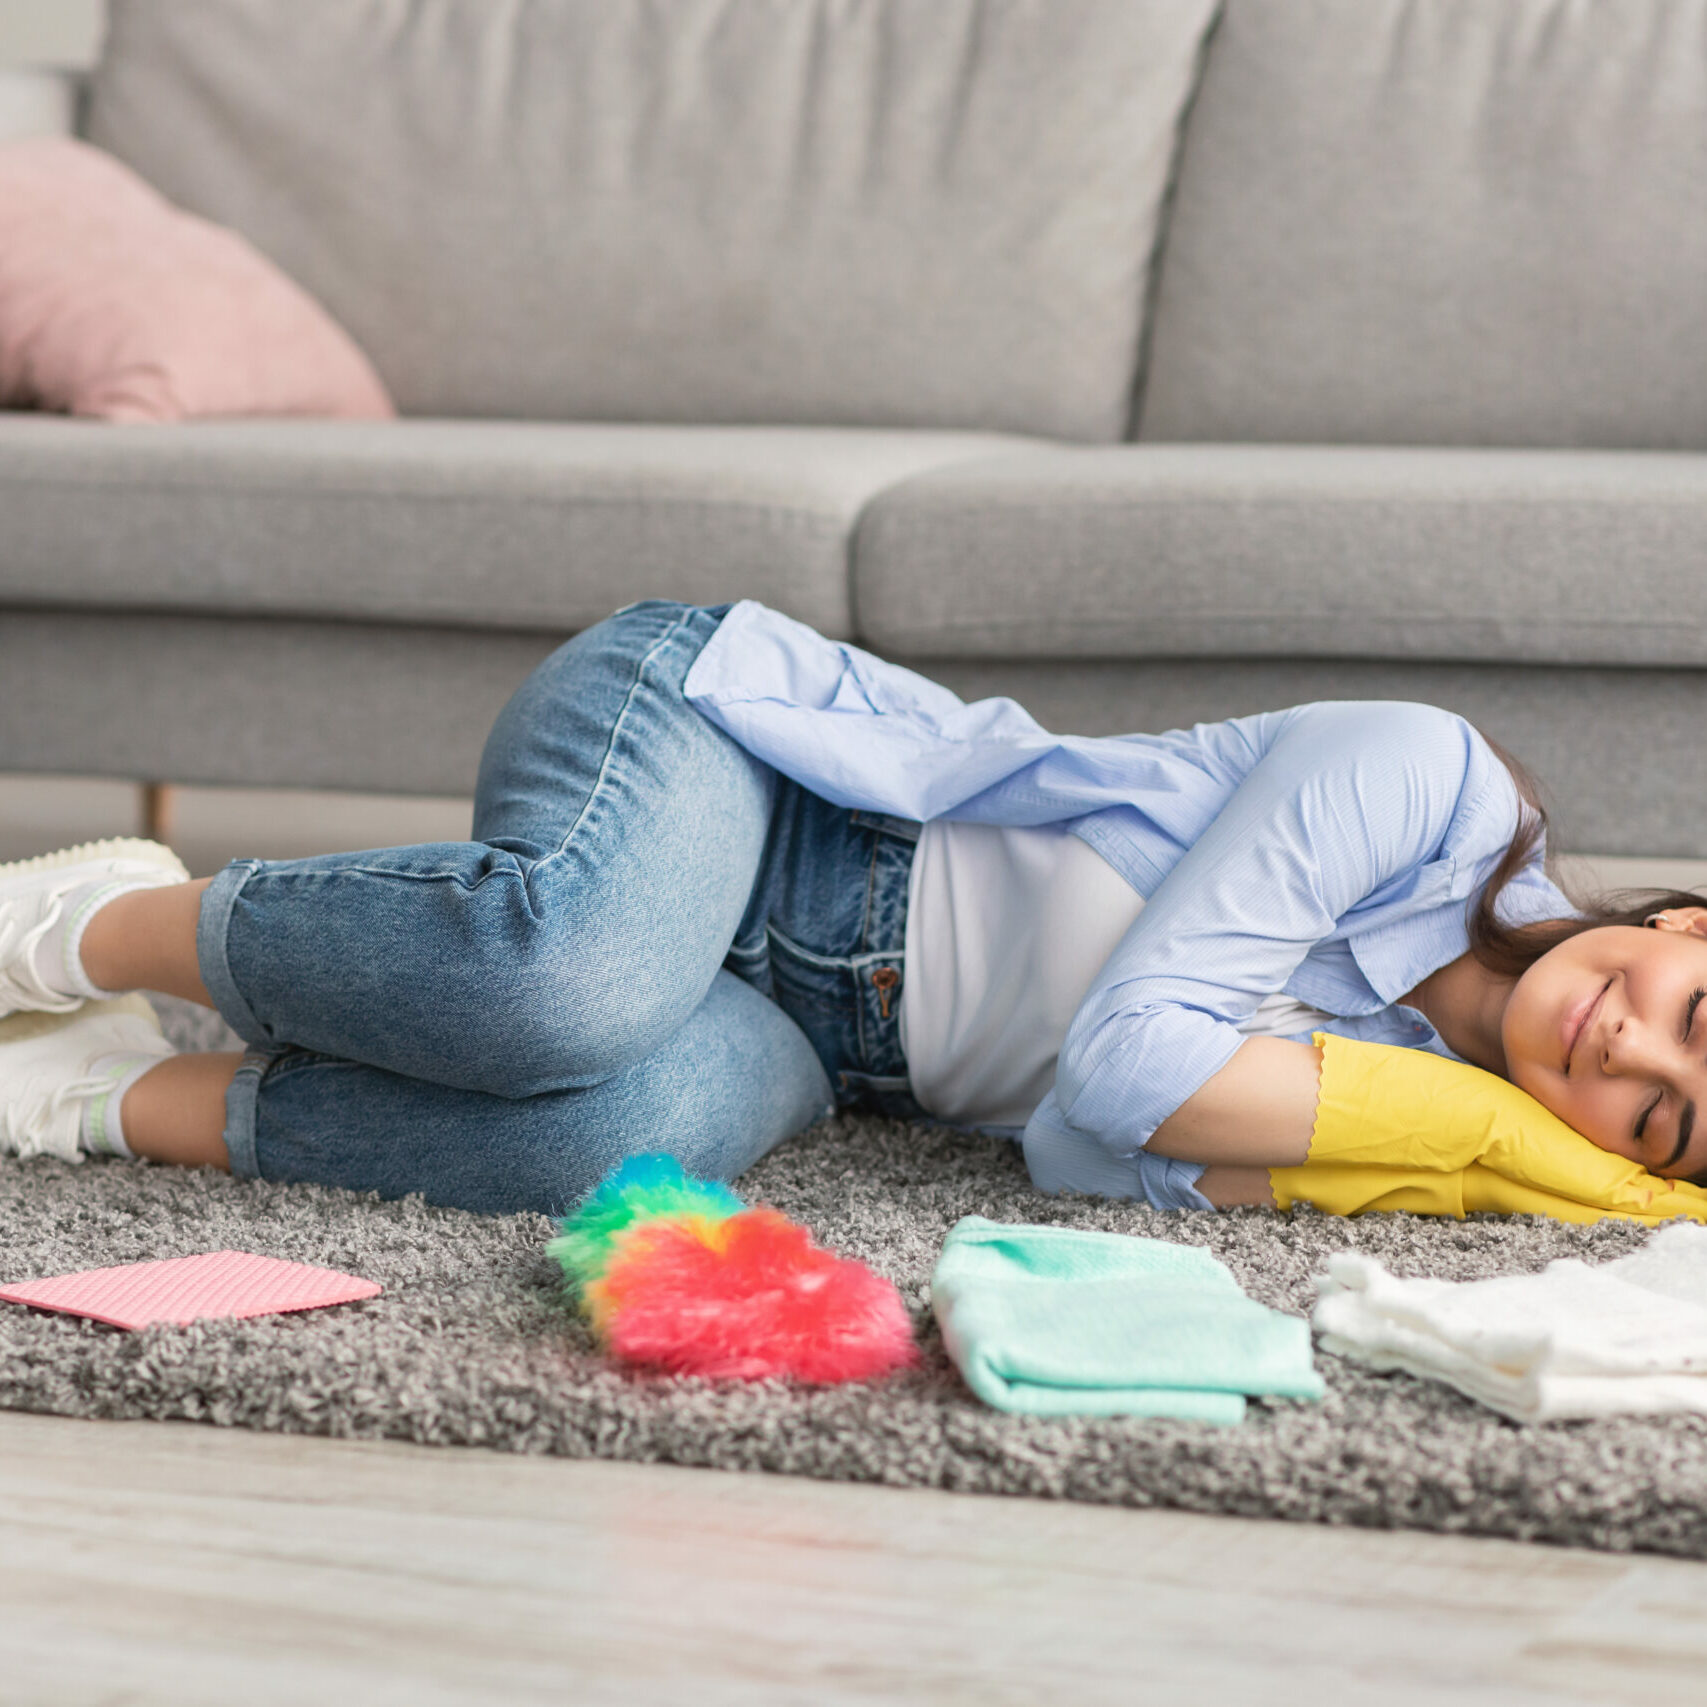 Tired millennial housewife sleeping on gray rug carpet in living room, surrounded by cleaning supplies, copy space. Overworked young lady napping, exhausted after domestic duties, needing rest